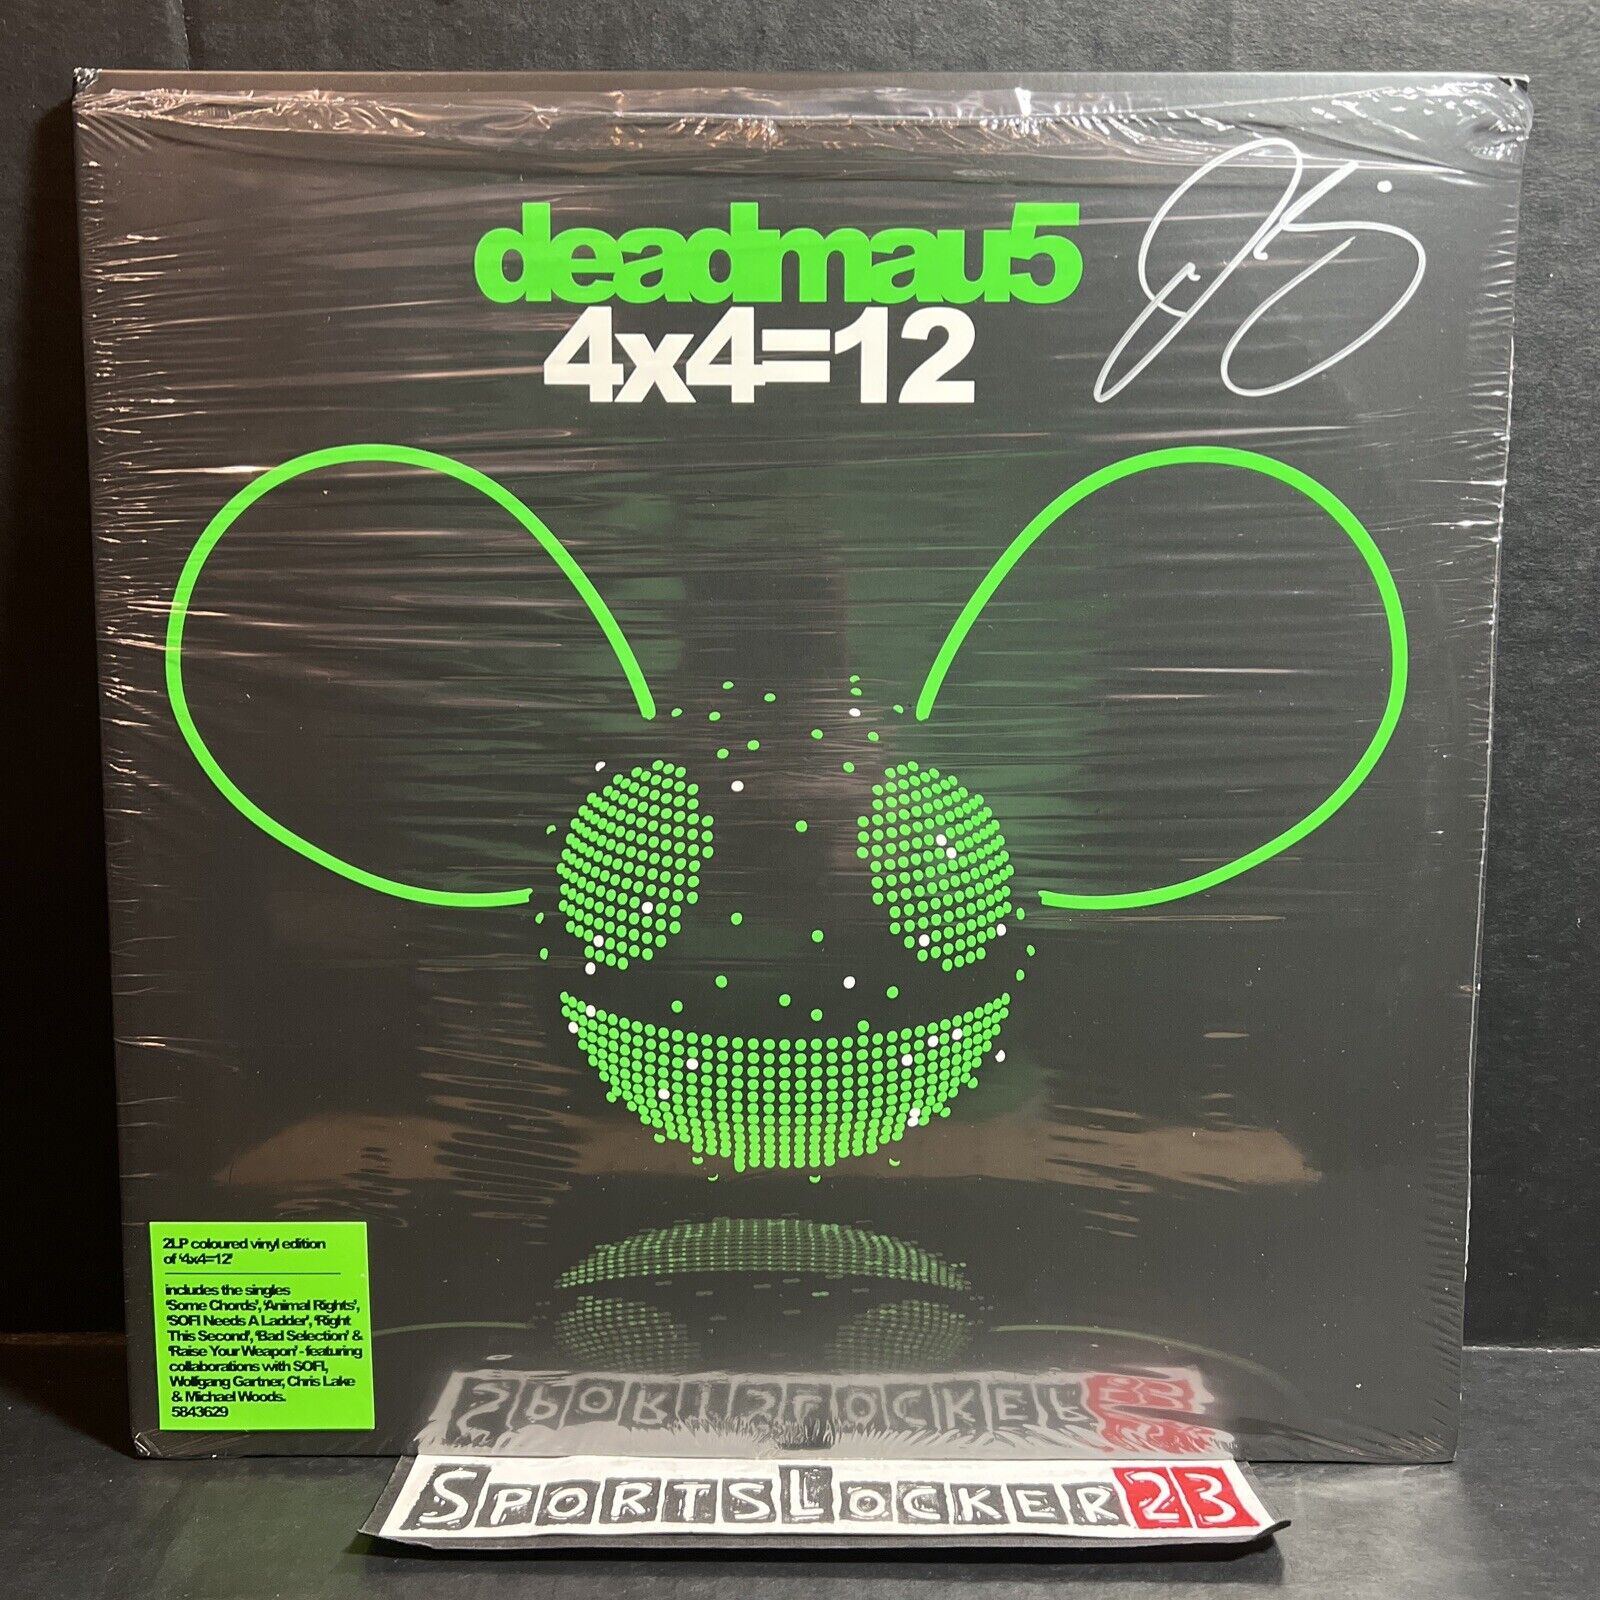 DEADMAU5 4×4=12 COLORED Vinyl LP Record LE ***SIGNED*** FAST SHIP NEW - IN HAND⚡